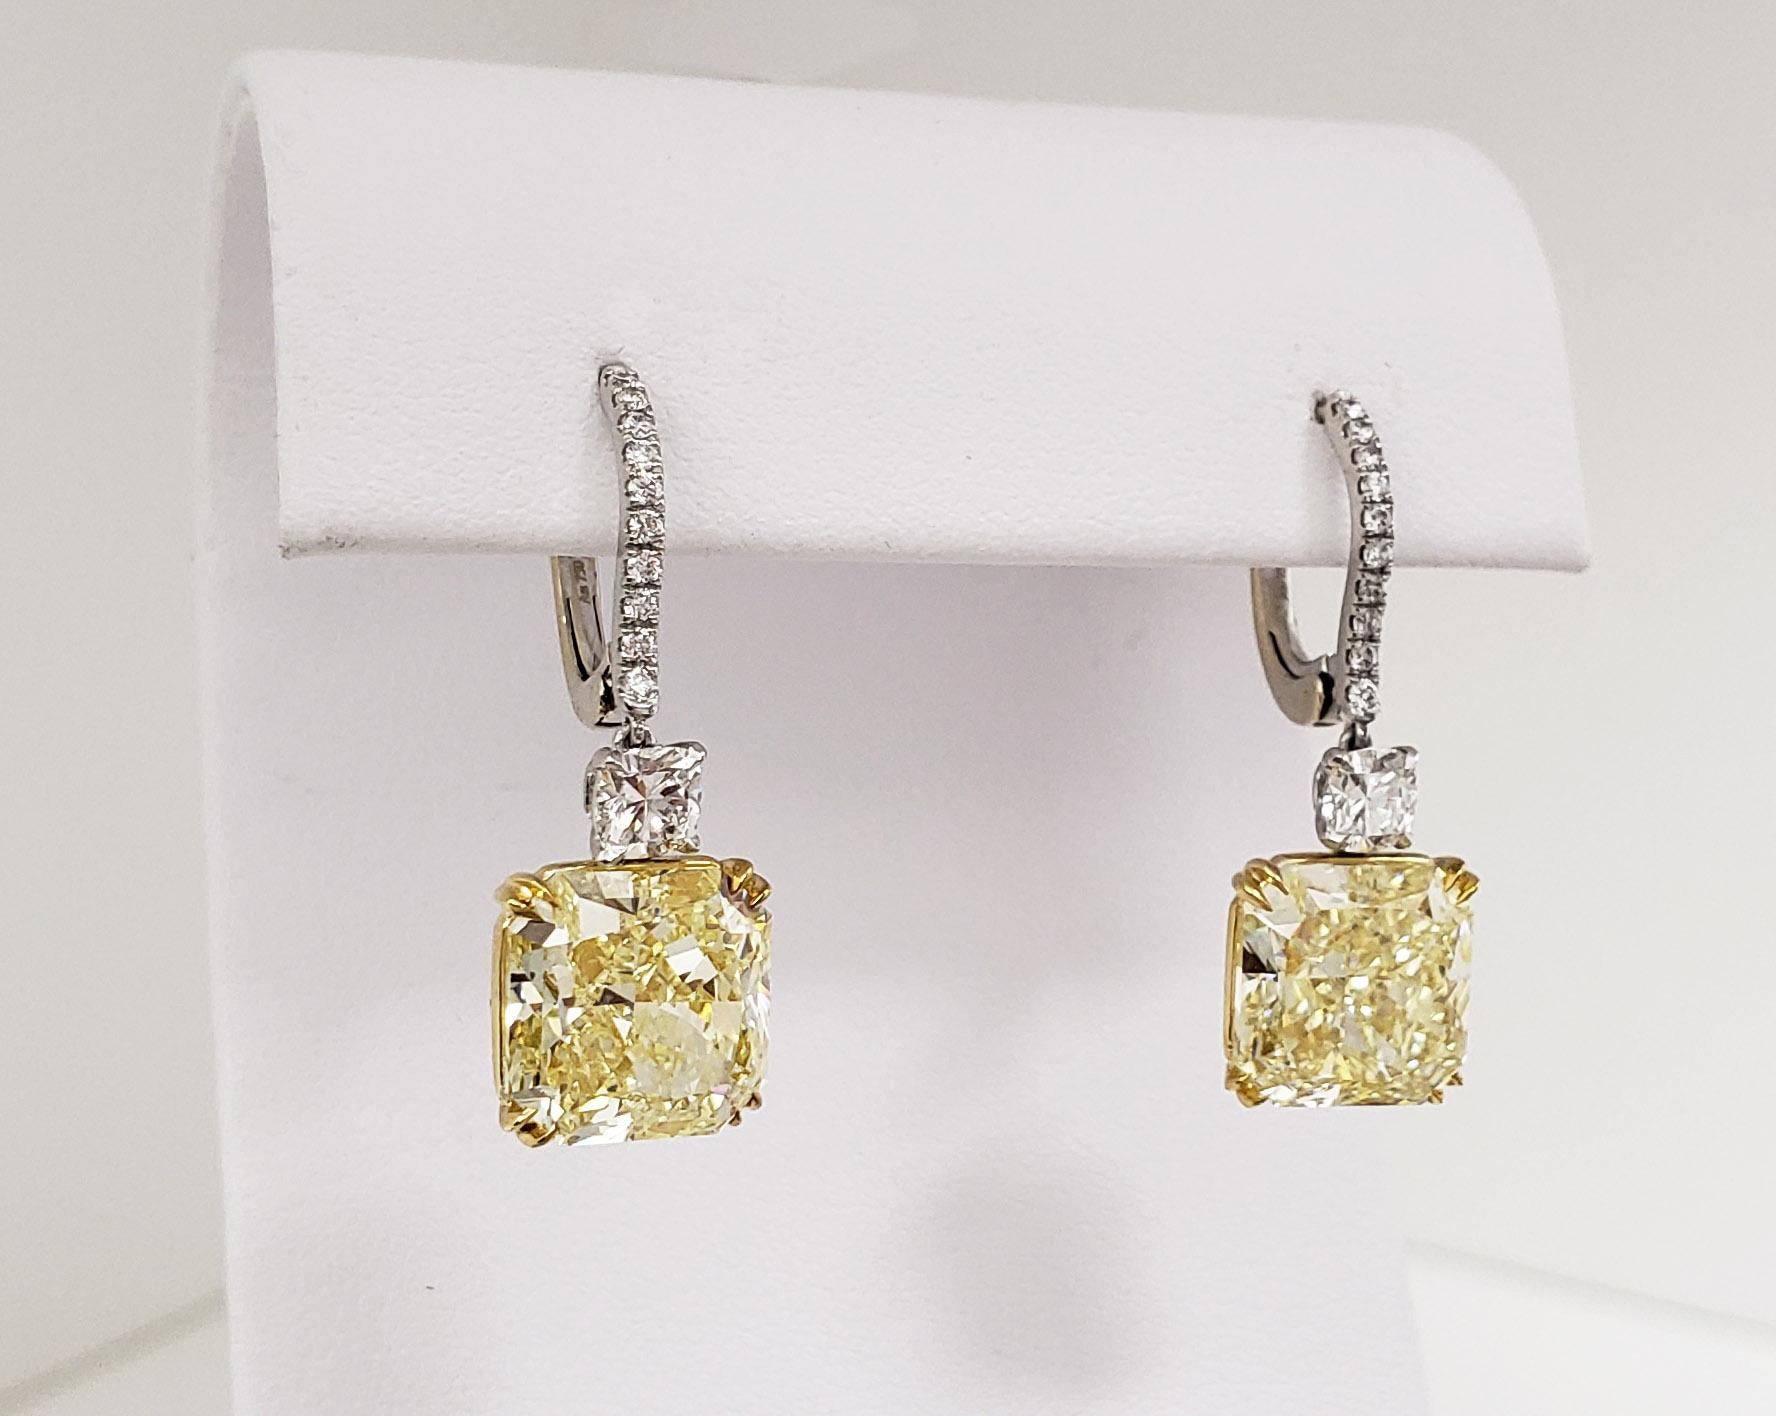 From SCARSELLI, this matched pair of Fancy Yellow diamonds, beautifully cut for dazzling brilliance. The yellow radiant cut diamonds 5 carats each VS2 clarity (see certificates pictures for more detailed stones' information) hang from a classic